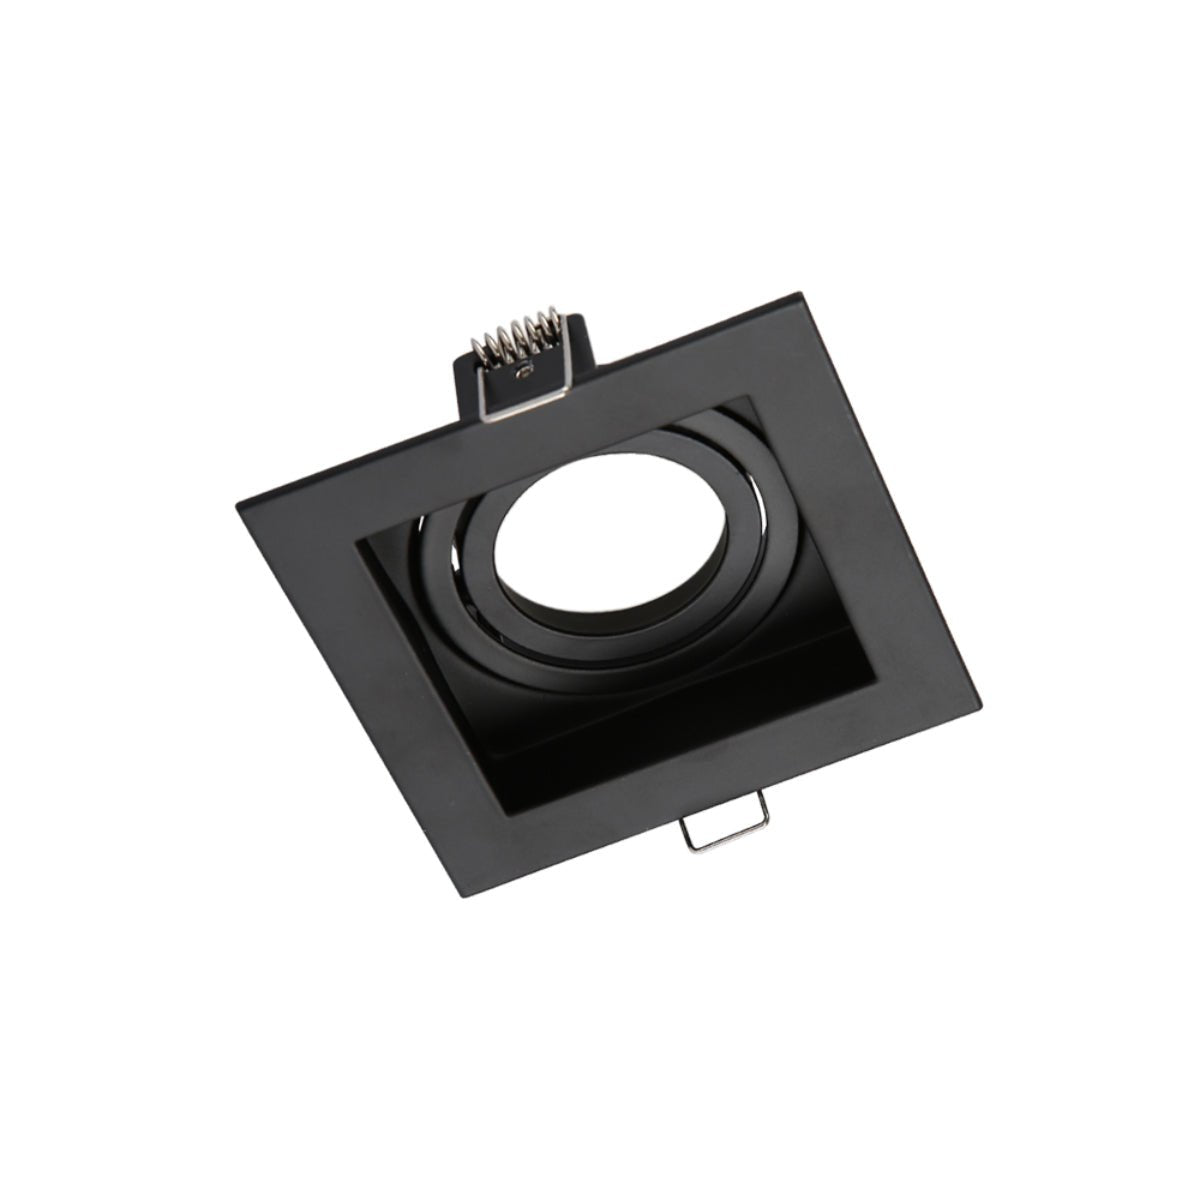 Main image of Grille Square Recessed Tilt Downlight Black with GU10 Fitting | TEKLED 165-03878